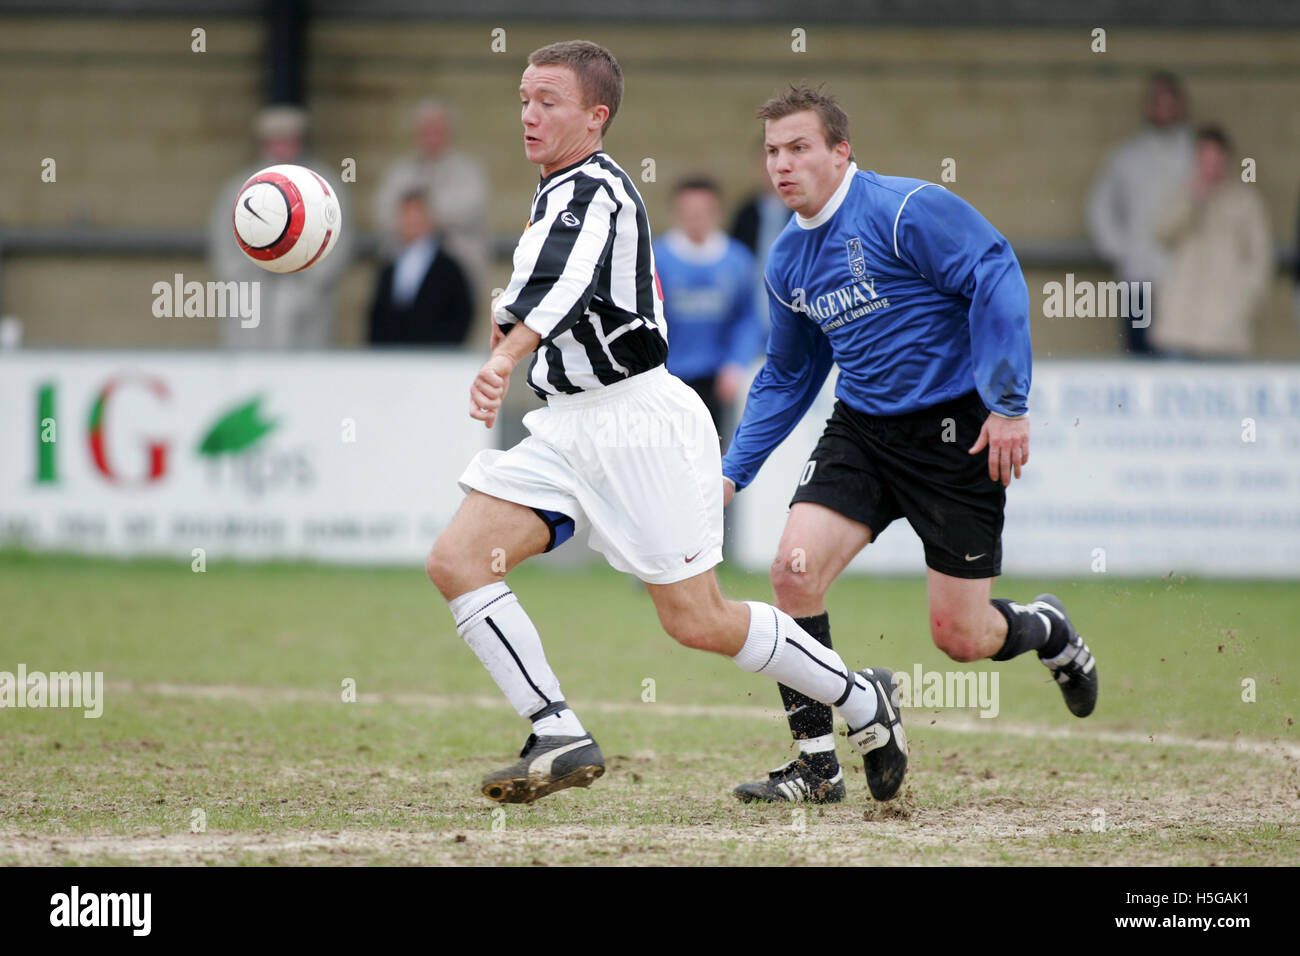 Fisher Athletic vs East Thurrock United - Ryman League at Dulwich Hamlet FC - 16/04/05 Stock Photo